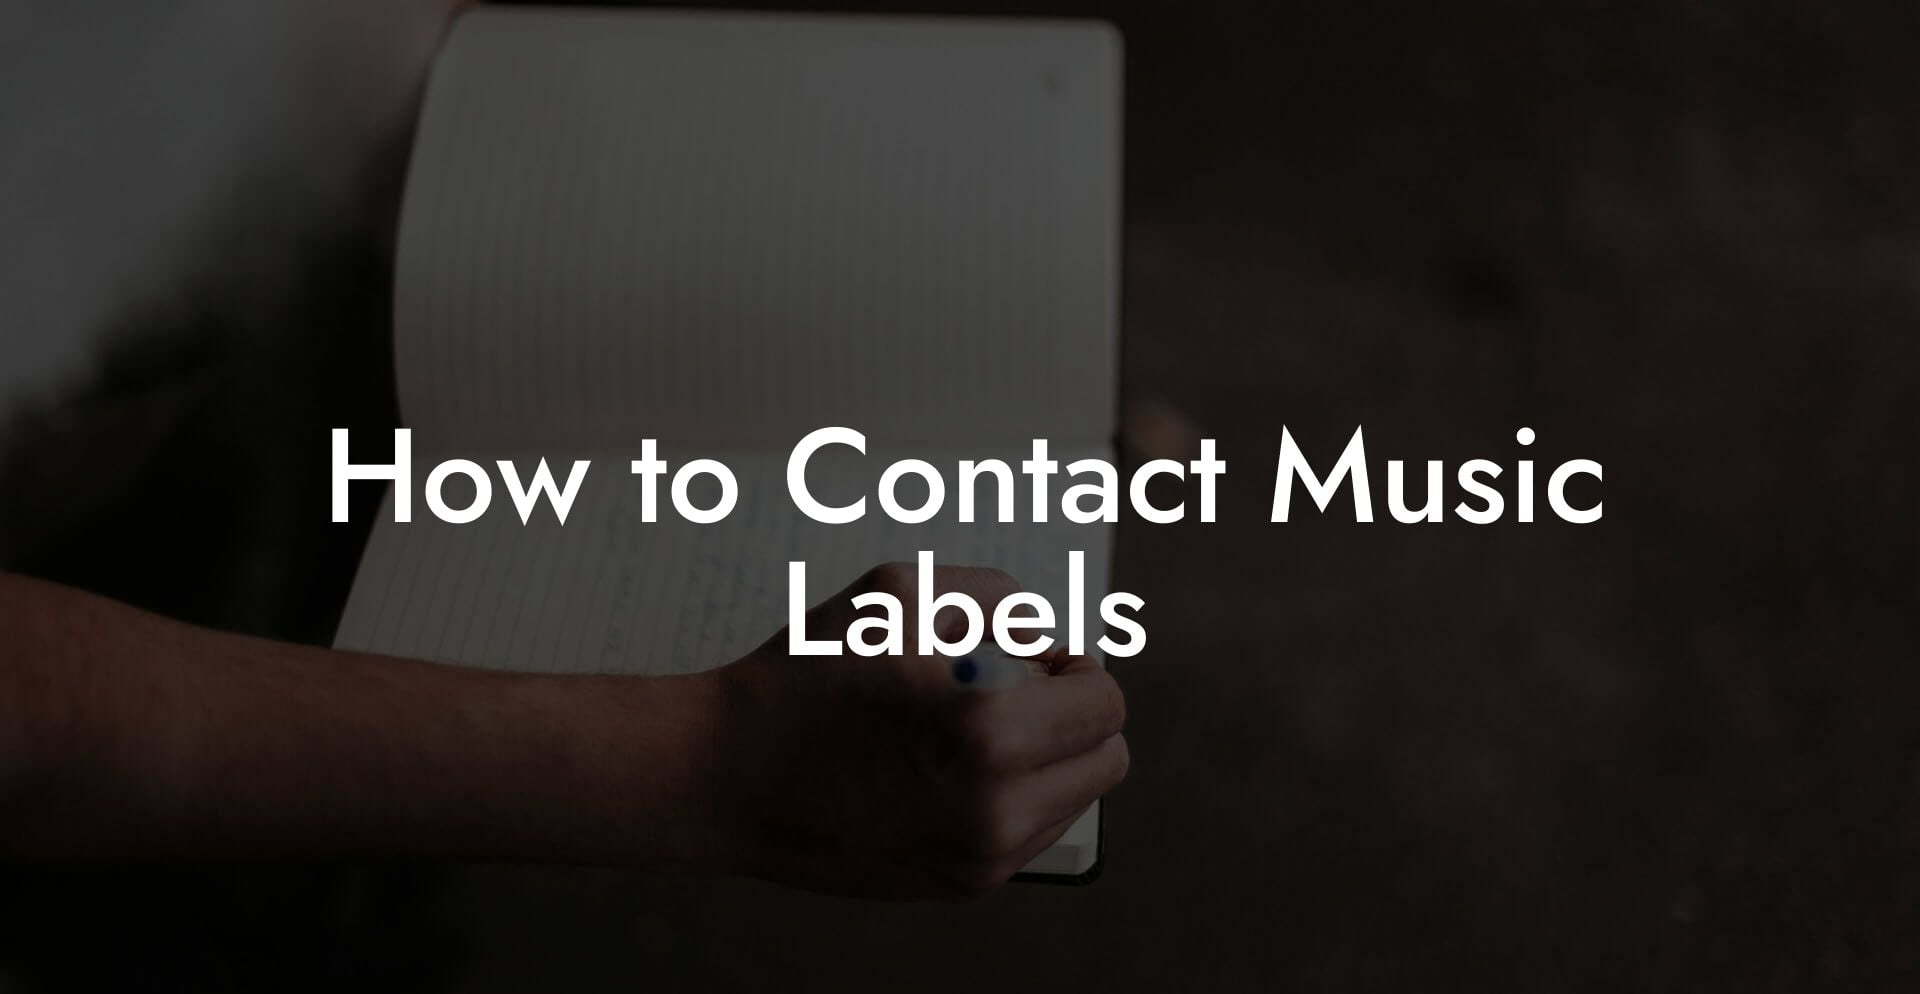 How to Contact Music Labels